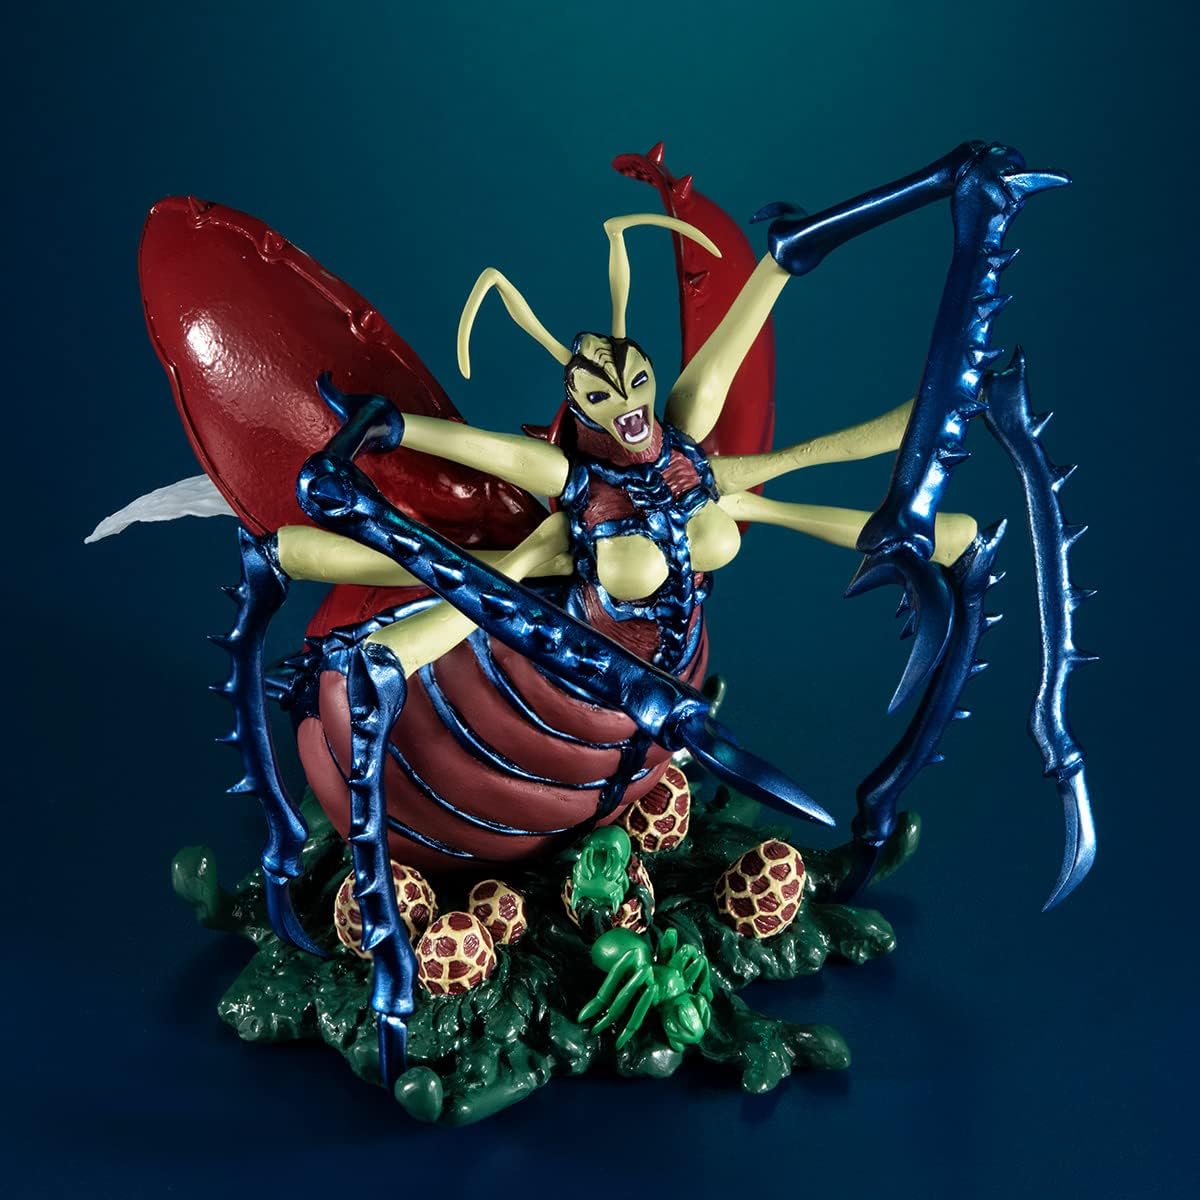 Megahouse Figures Monsters Chronicle: Yu Gi Oh Duel Monsters - Reina Insecto